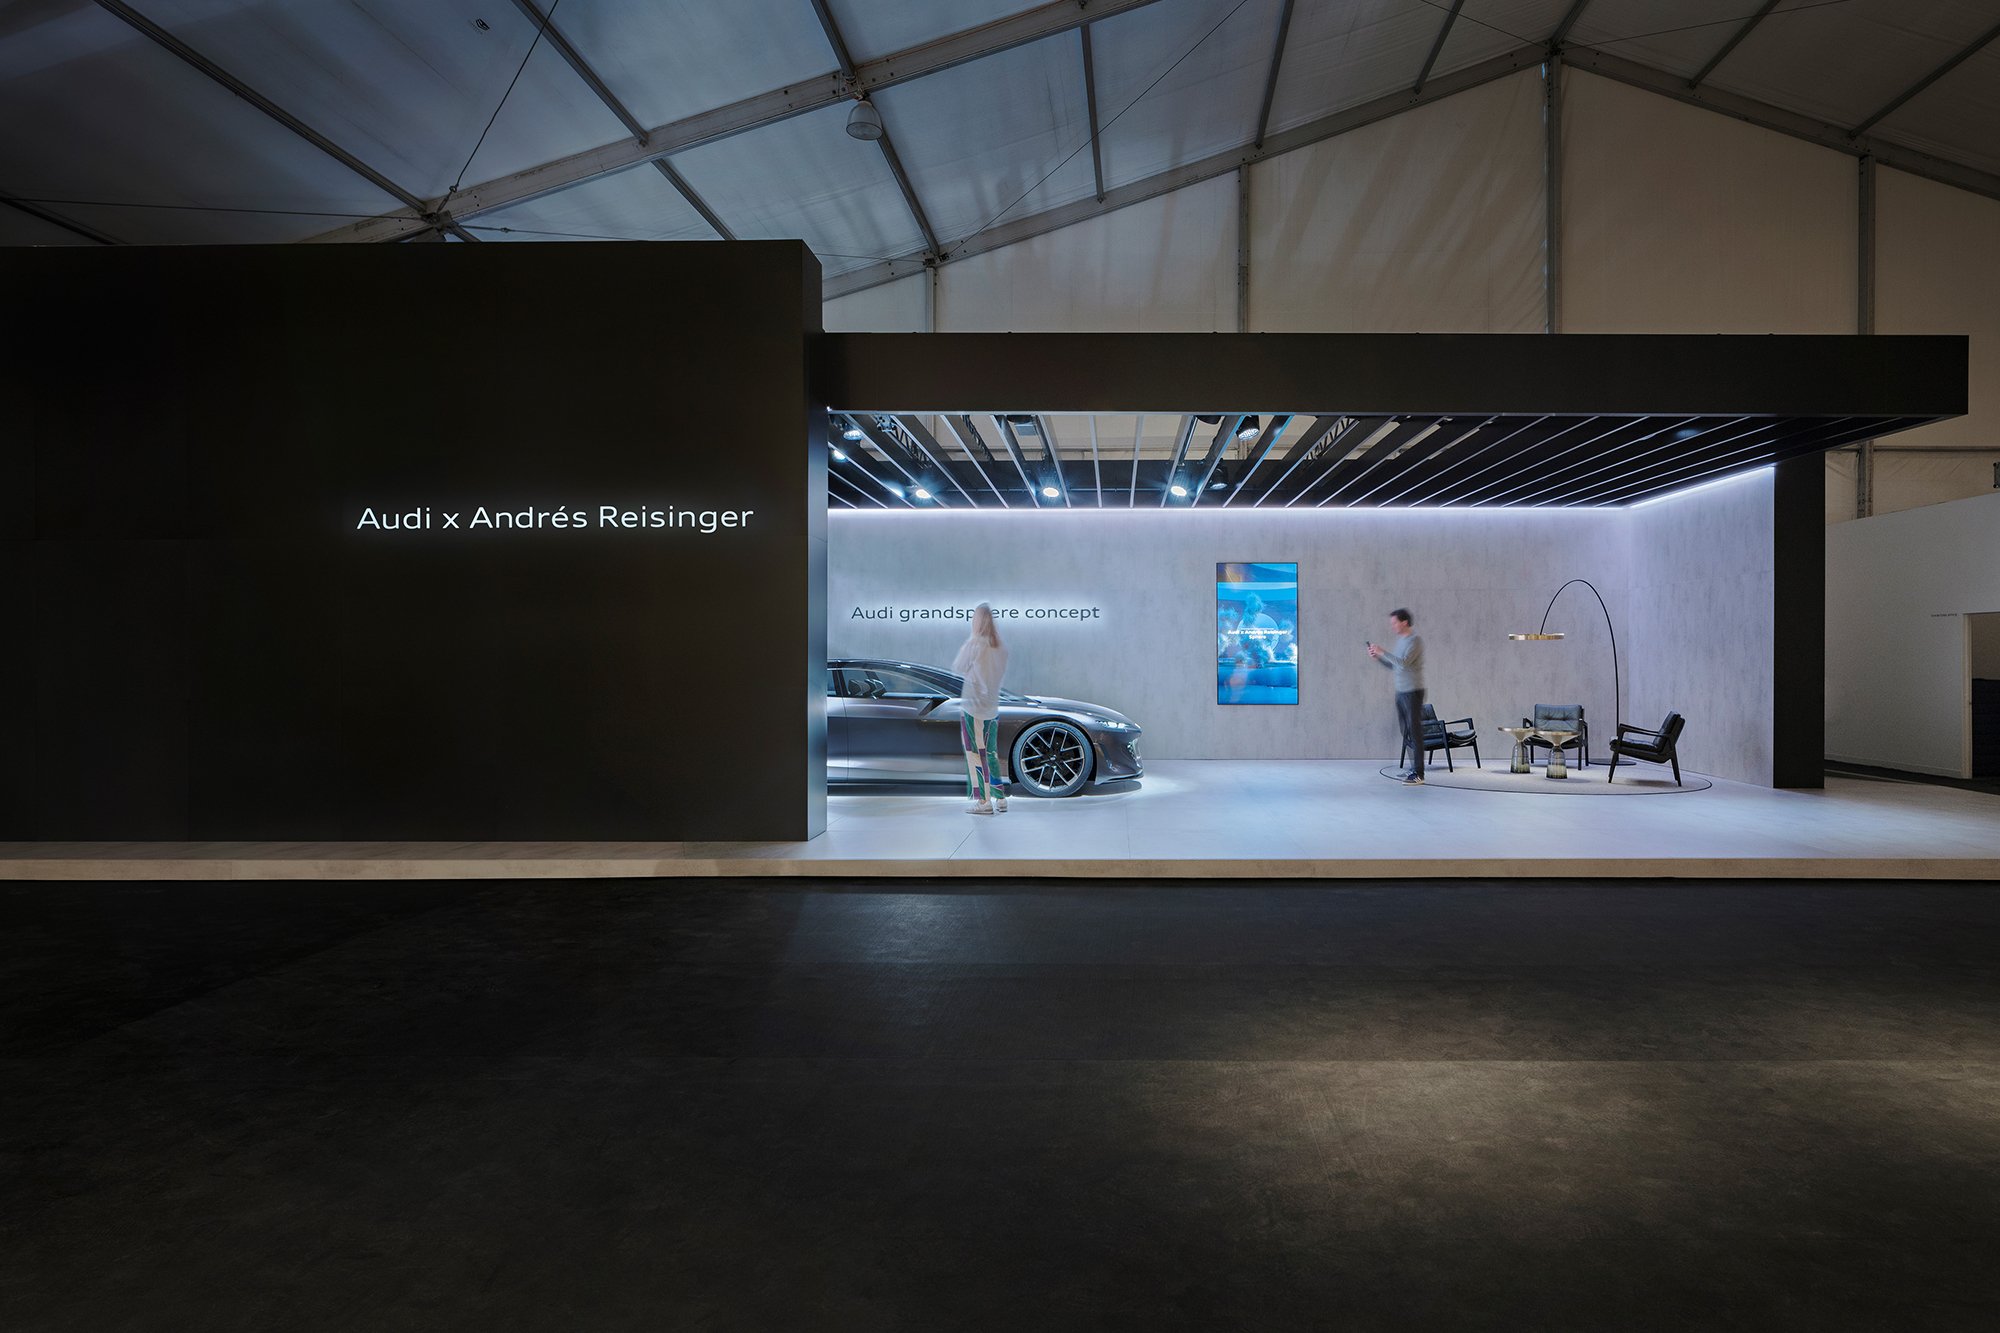 Audi's booth at Design Miami with artist Andres Reisinger